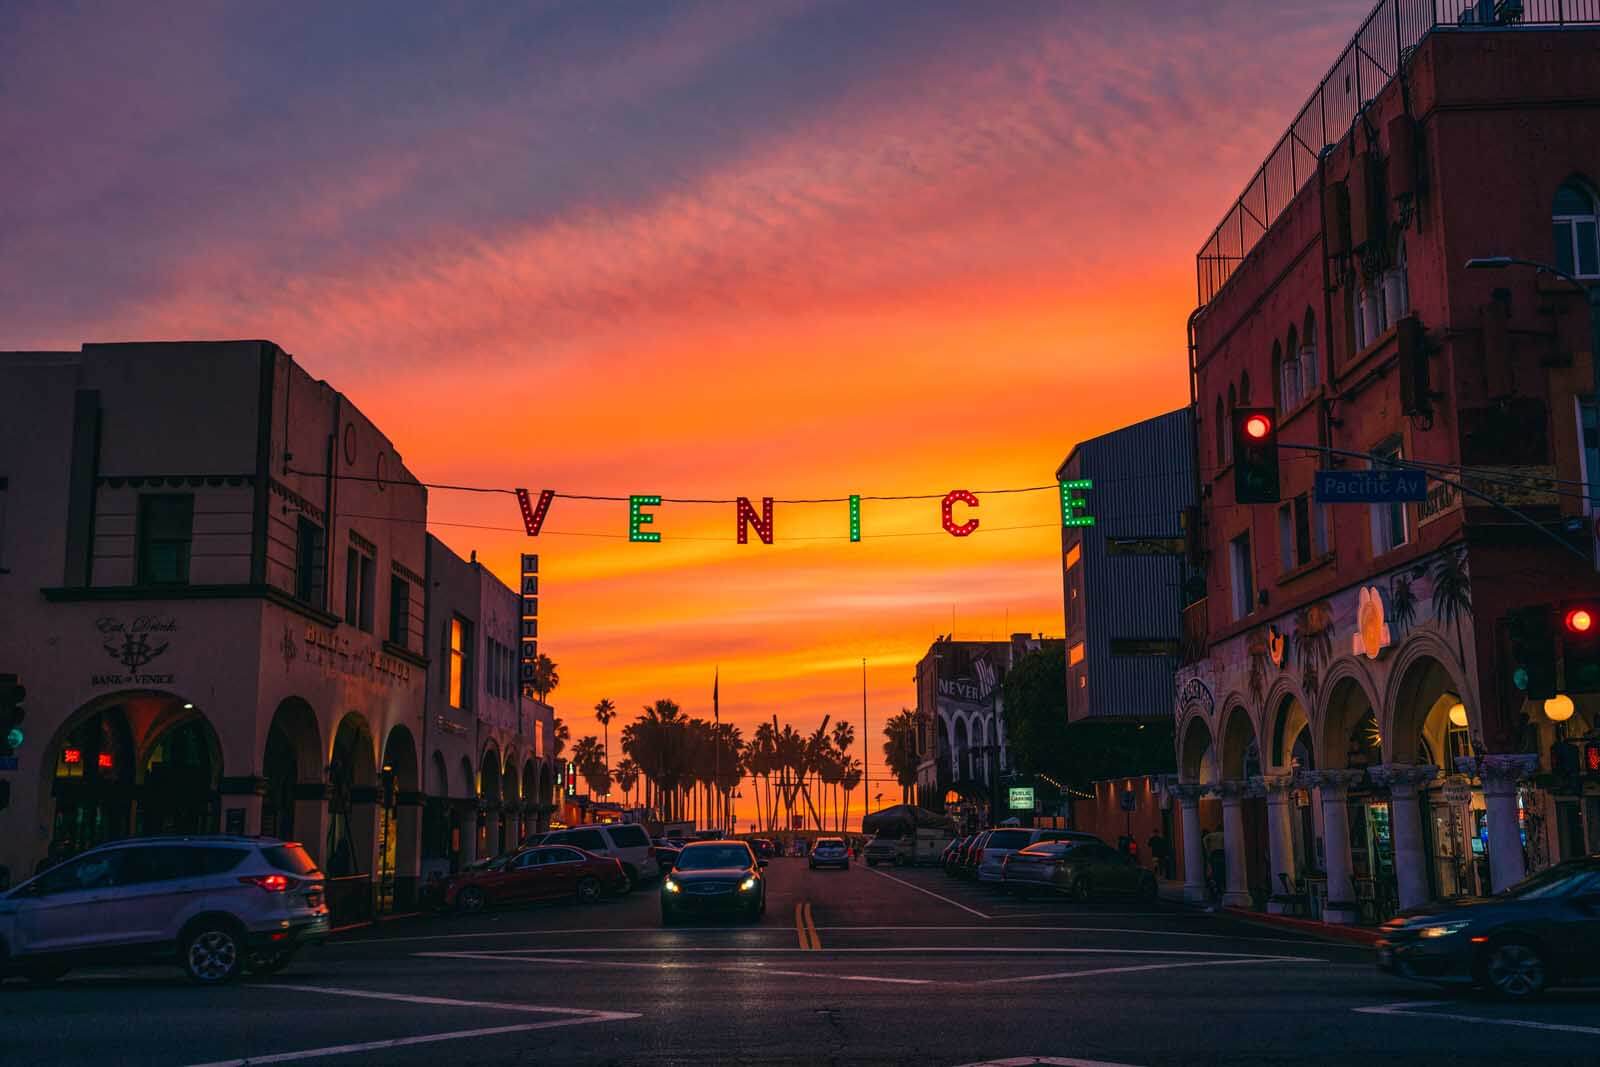 Venice Beach at Sunset in Los Angeles California